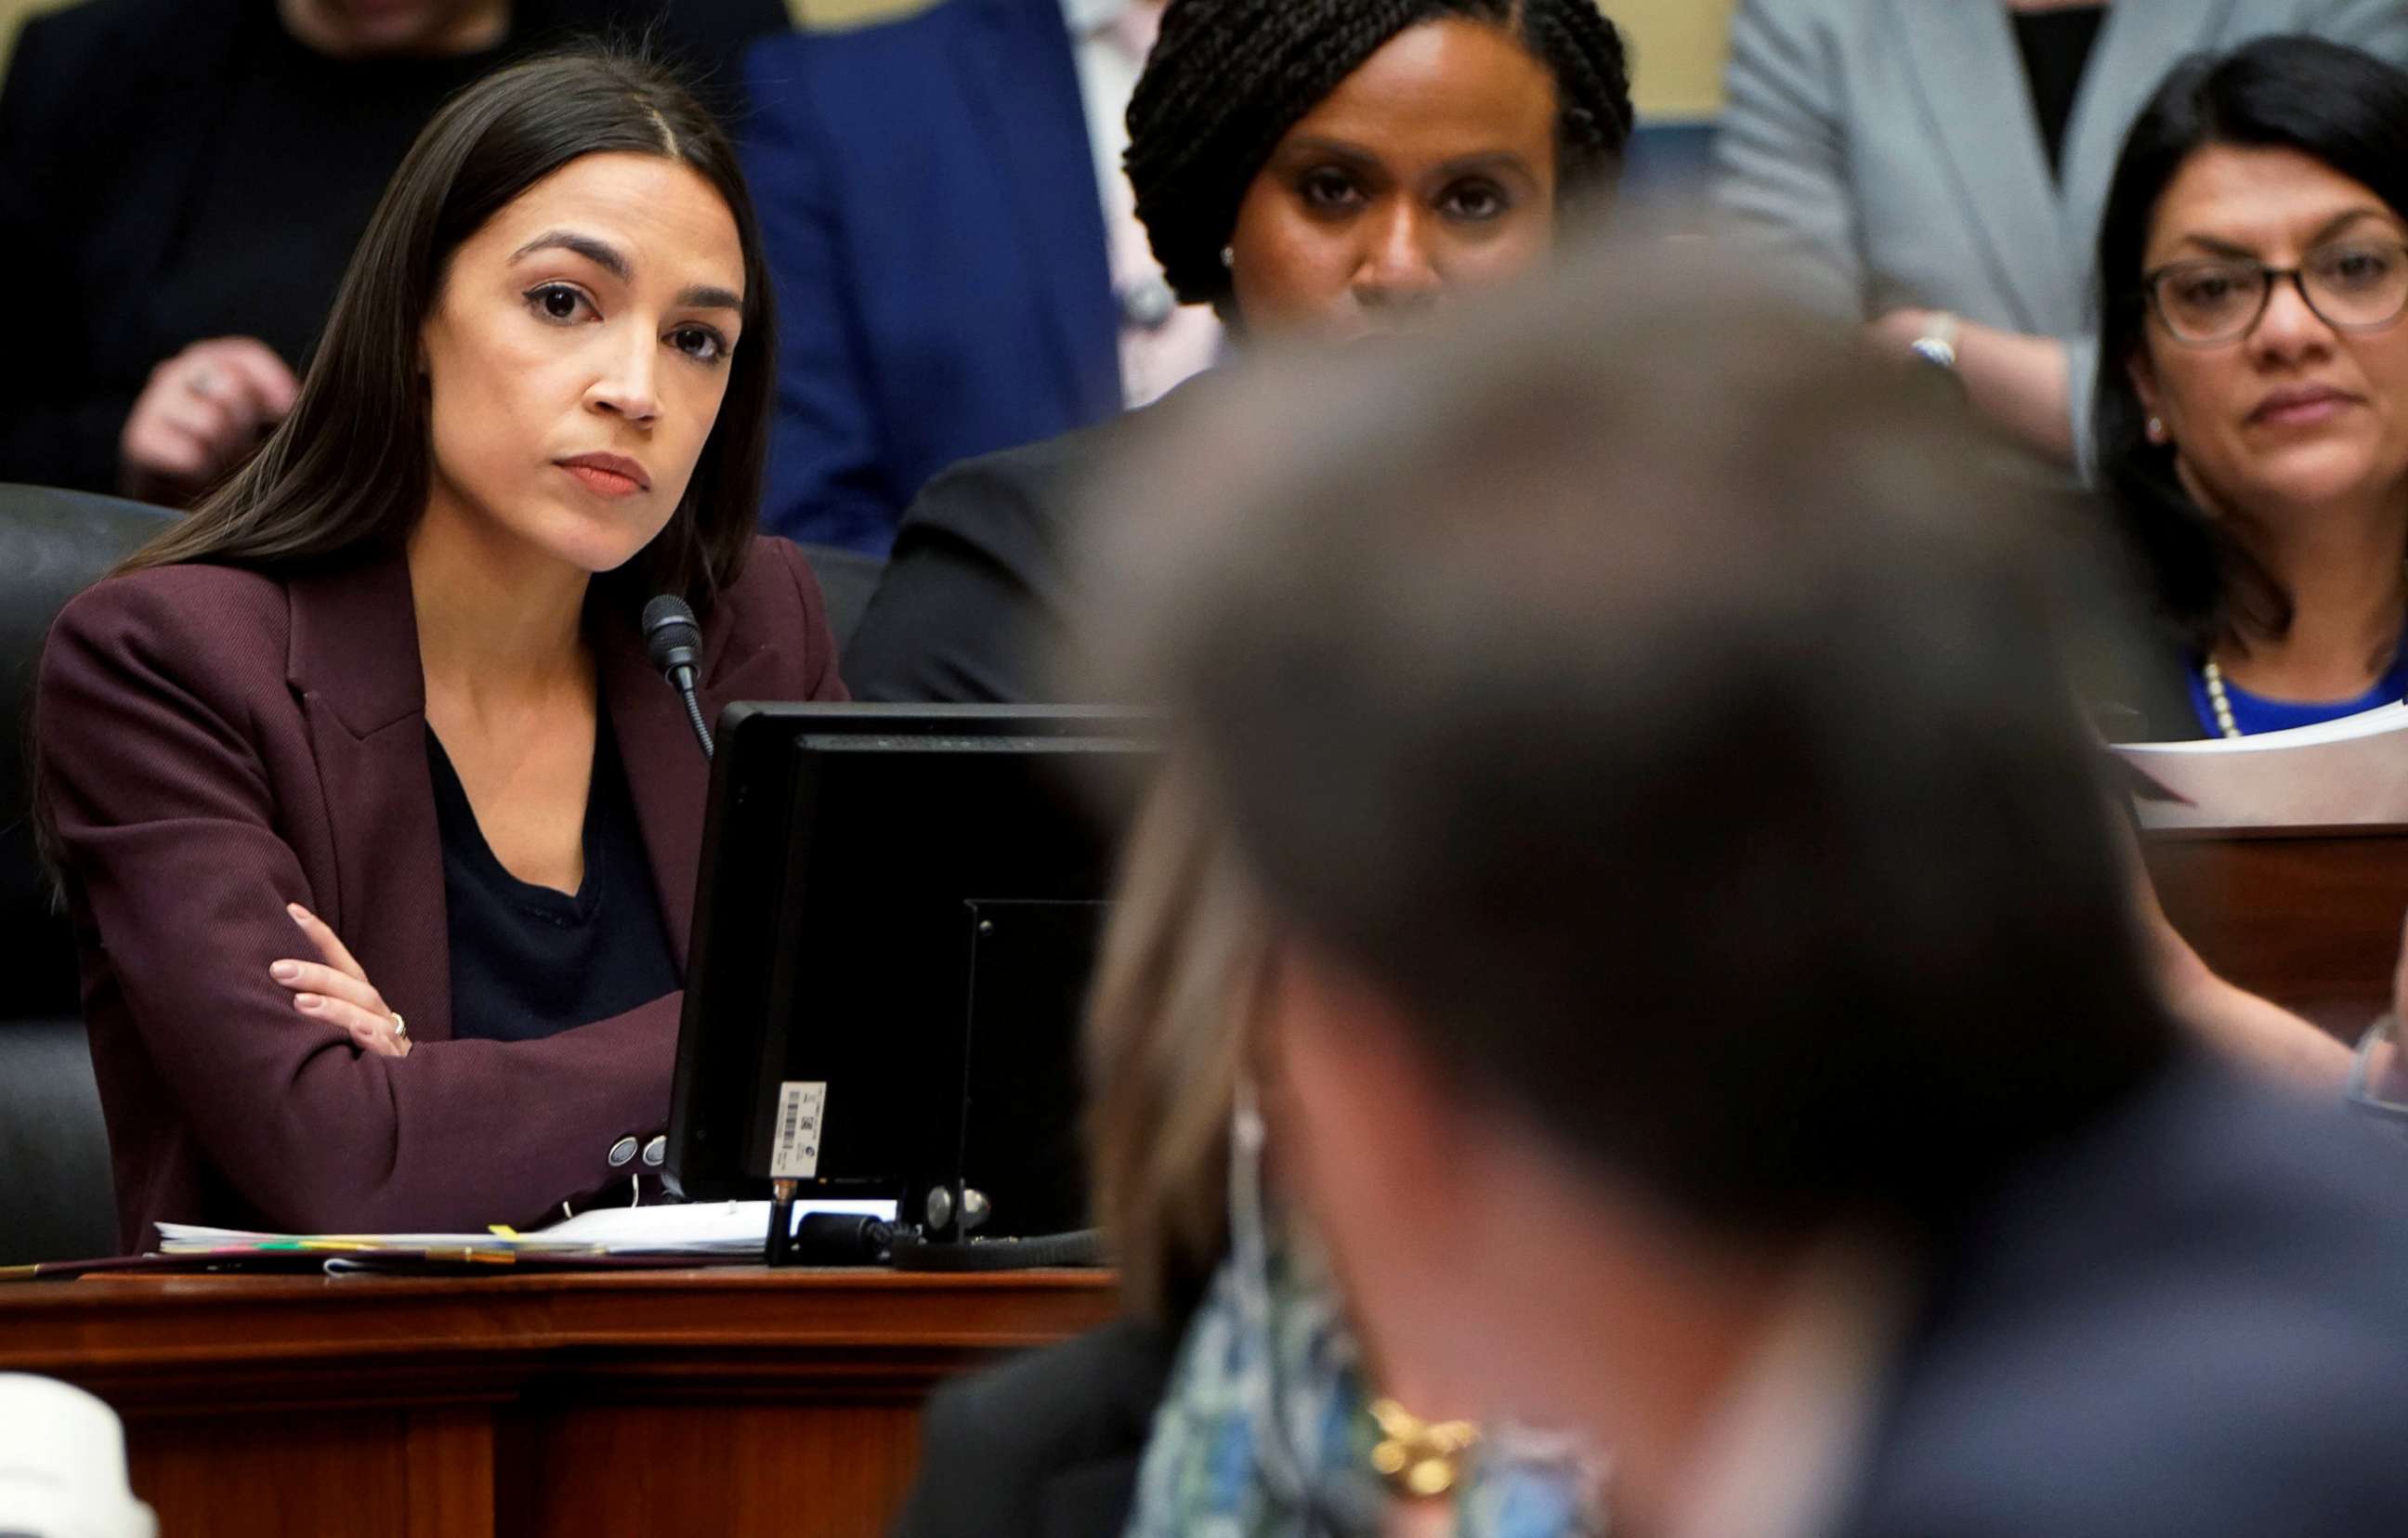 PHOTO: Rep. Alexandria Ocasio-Cortez, Rep. Ayanna Pressley and Rep. Rashida Tlaib listen to former Trump personal attorney Michael Cohen during his testimony at a House Committee on Oversight and Reform hearing on Capitol Hill, Feb. 27, 2019.